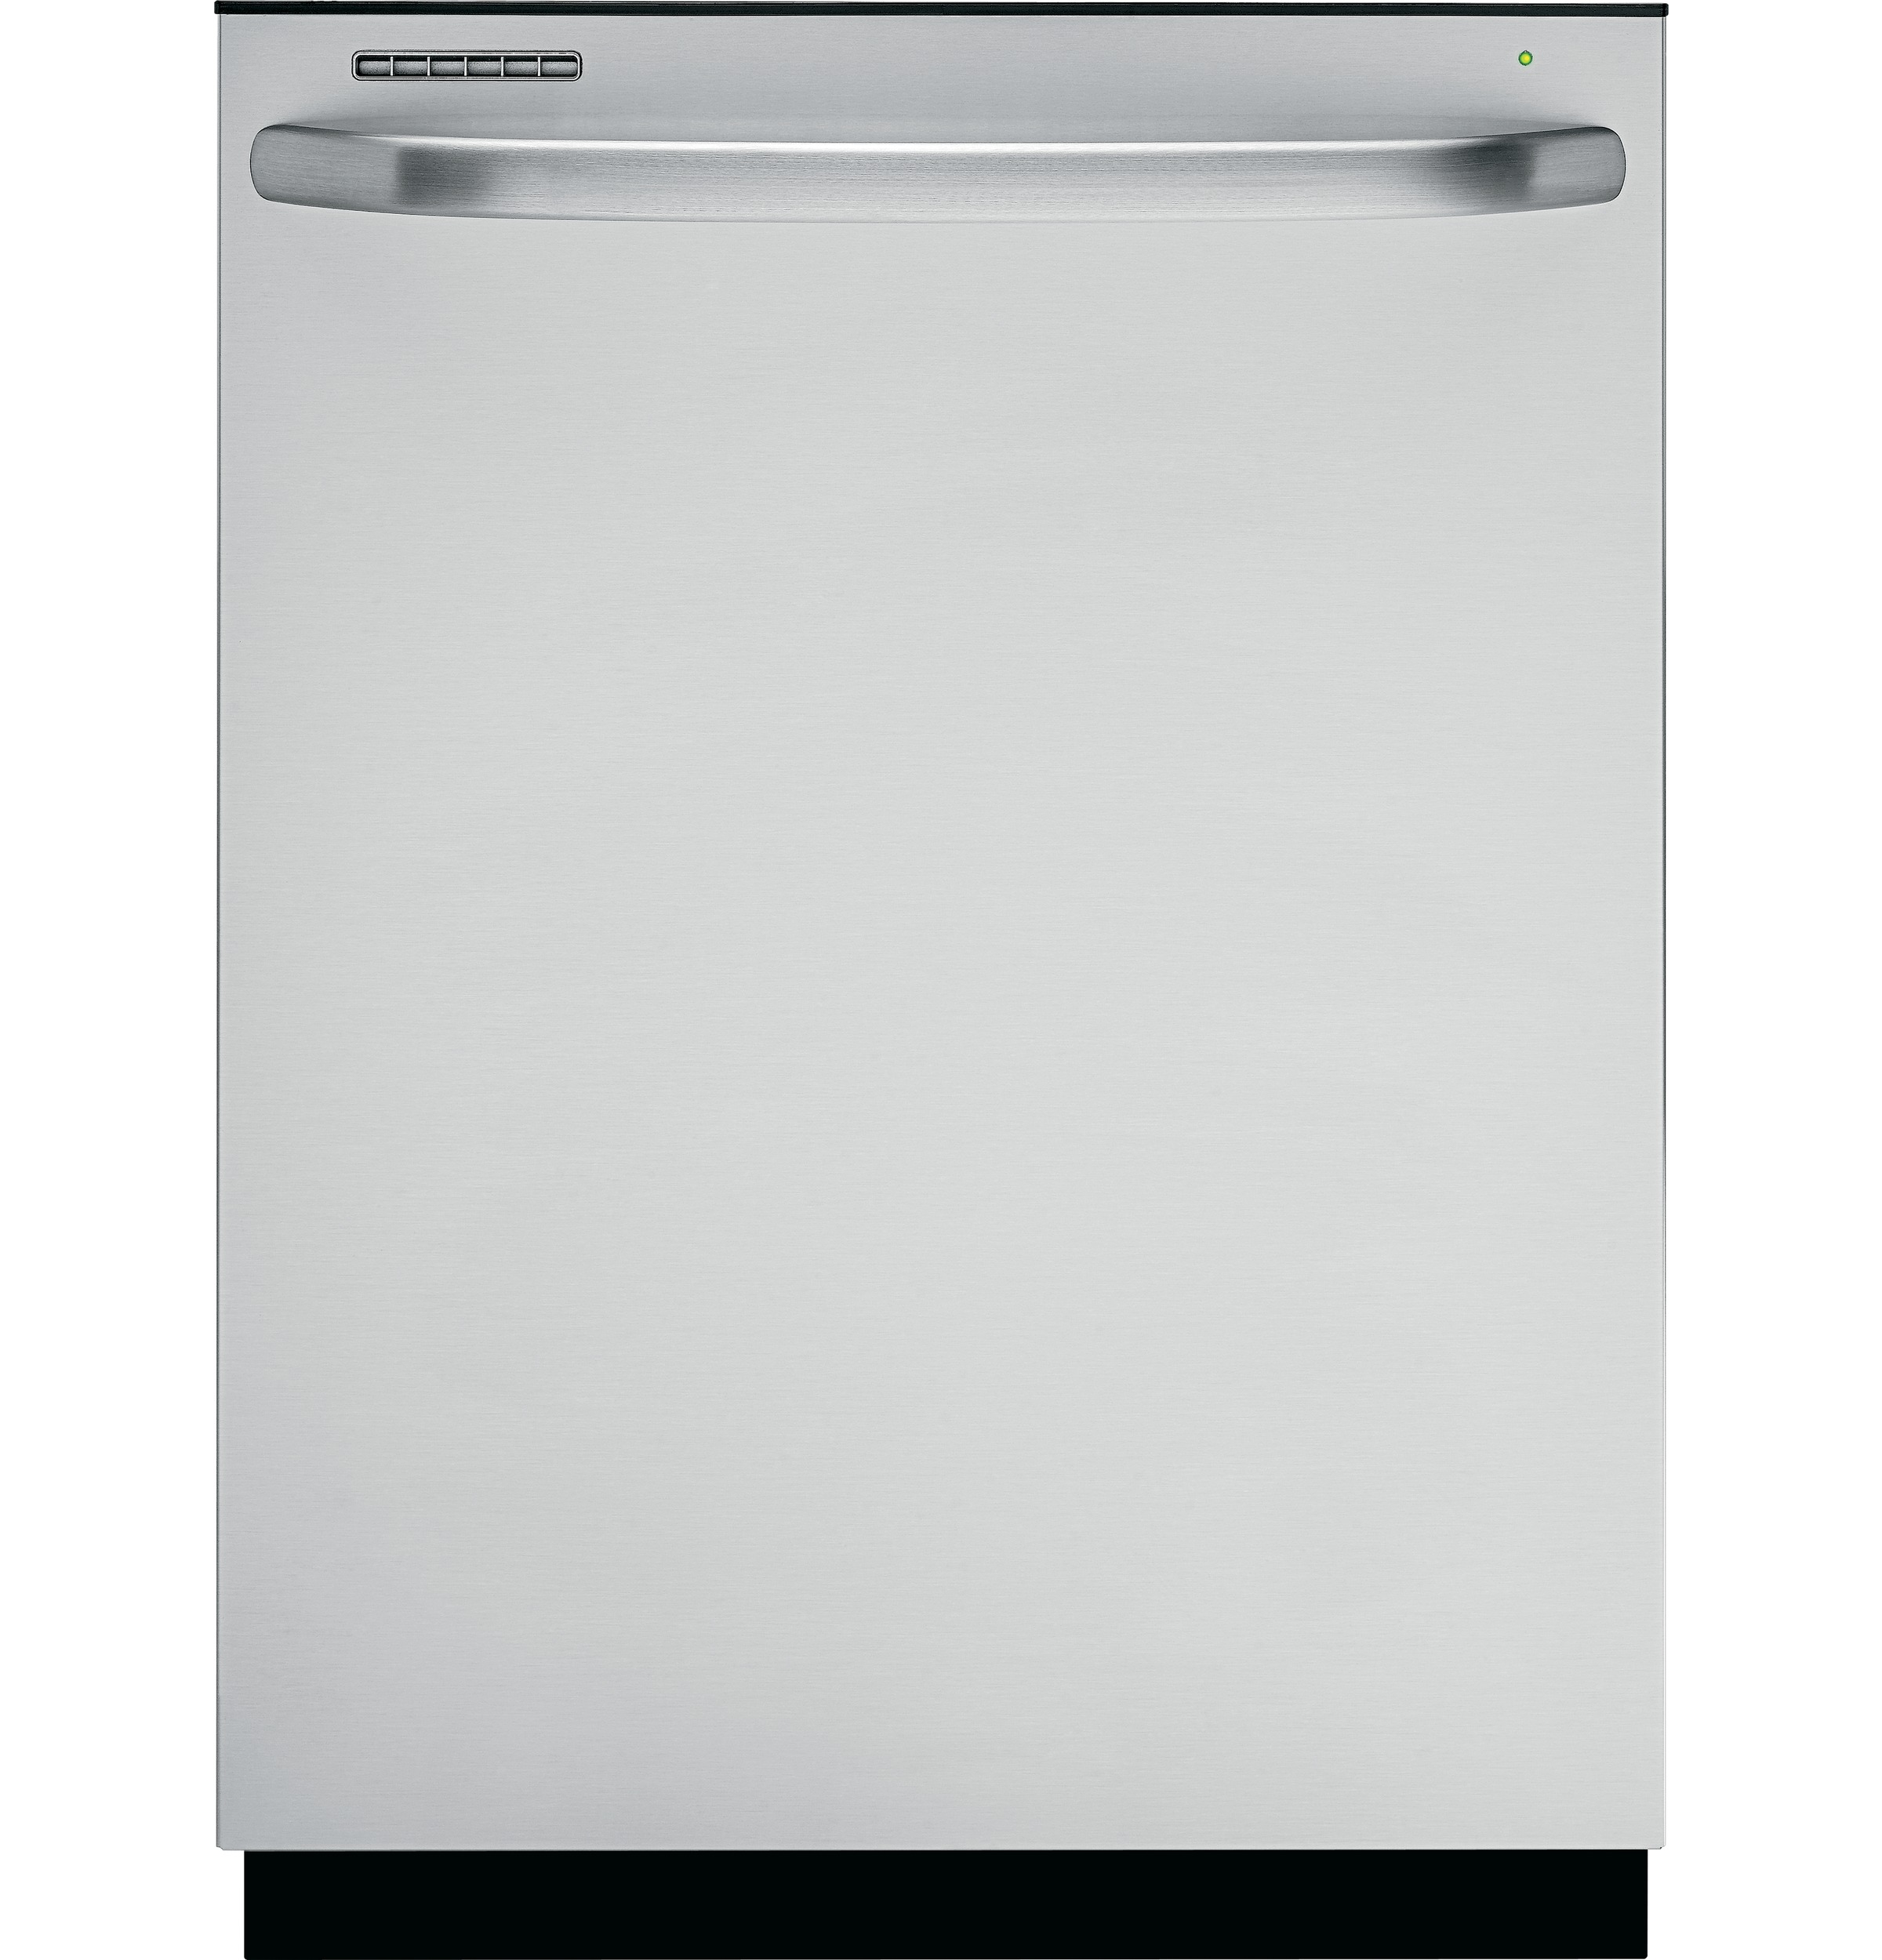 GE® Tall Tub Built-In Dishwasher with hidden controls and auto wash cycle